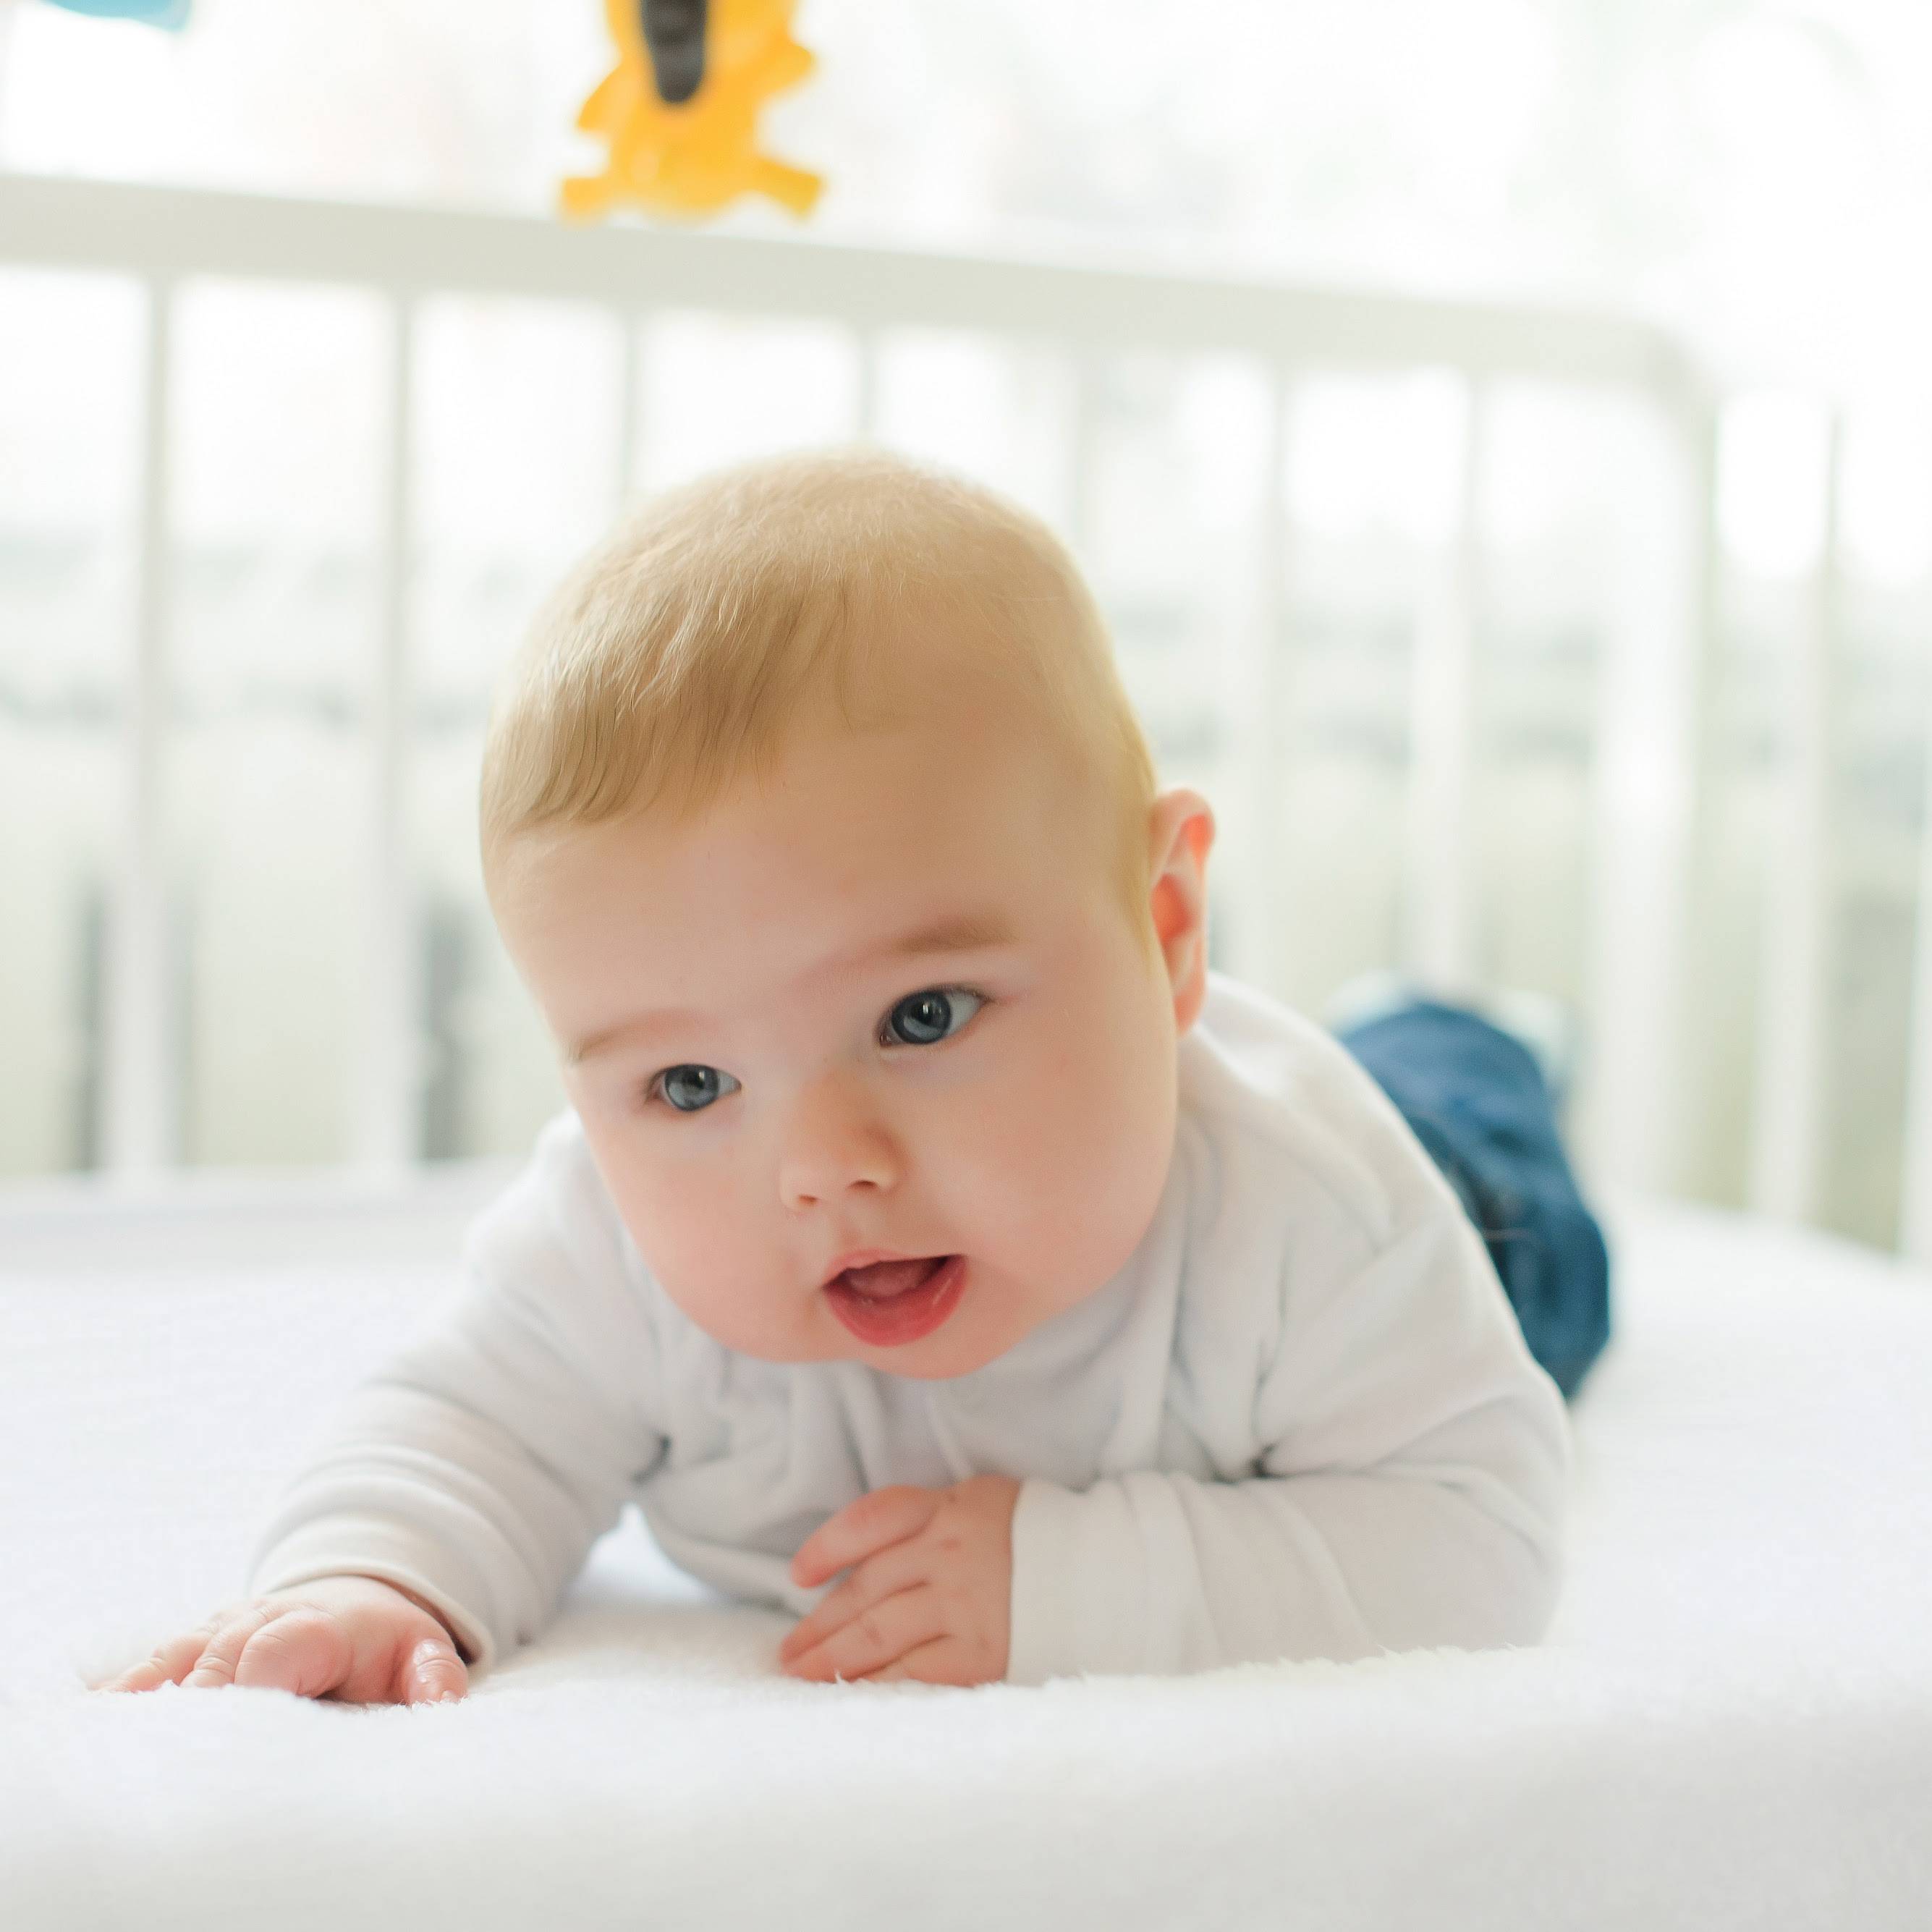 Infant laying down on a health, nontoxic breathable crib mattress by Ergo-Pedic.